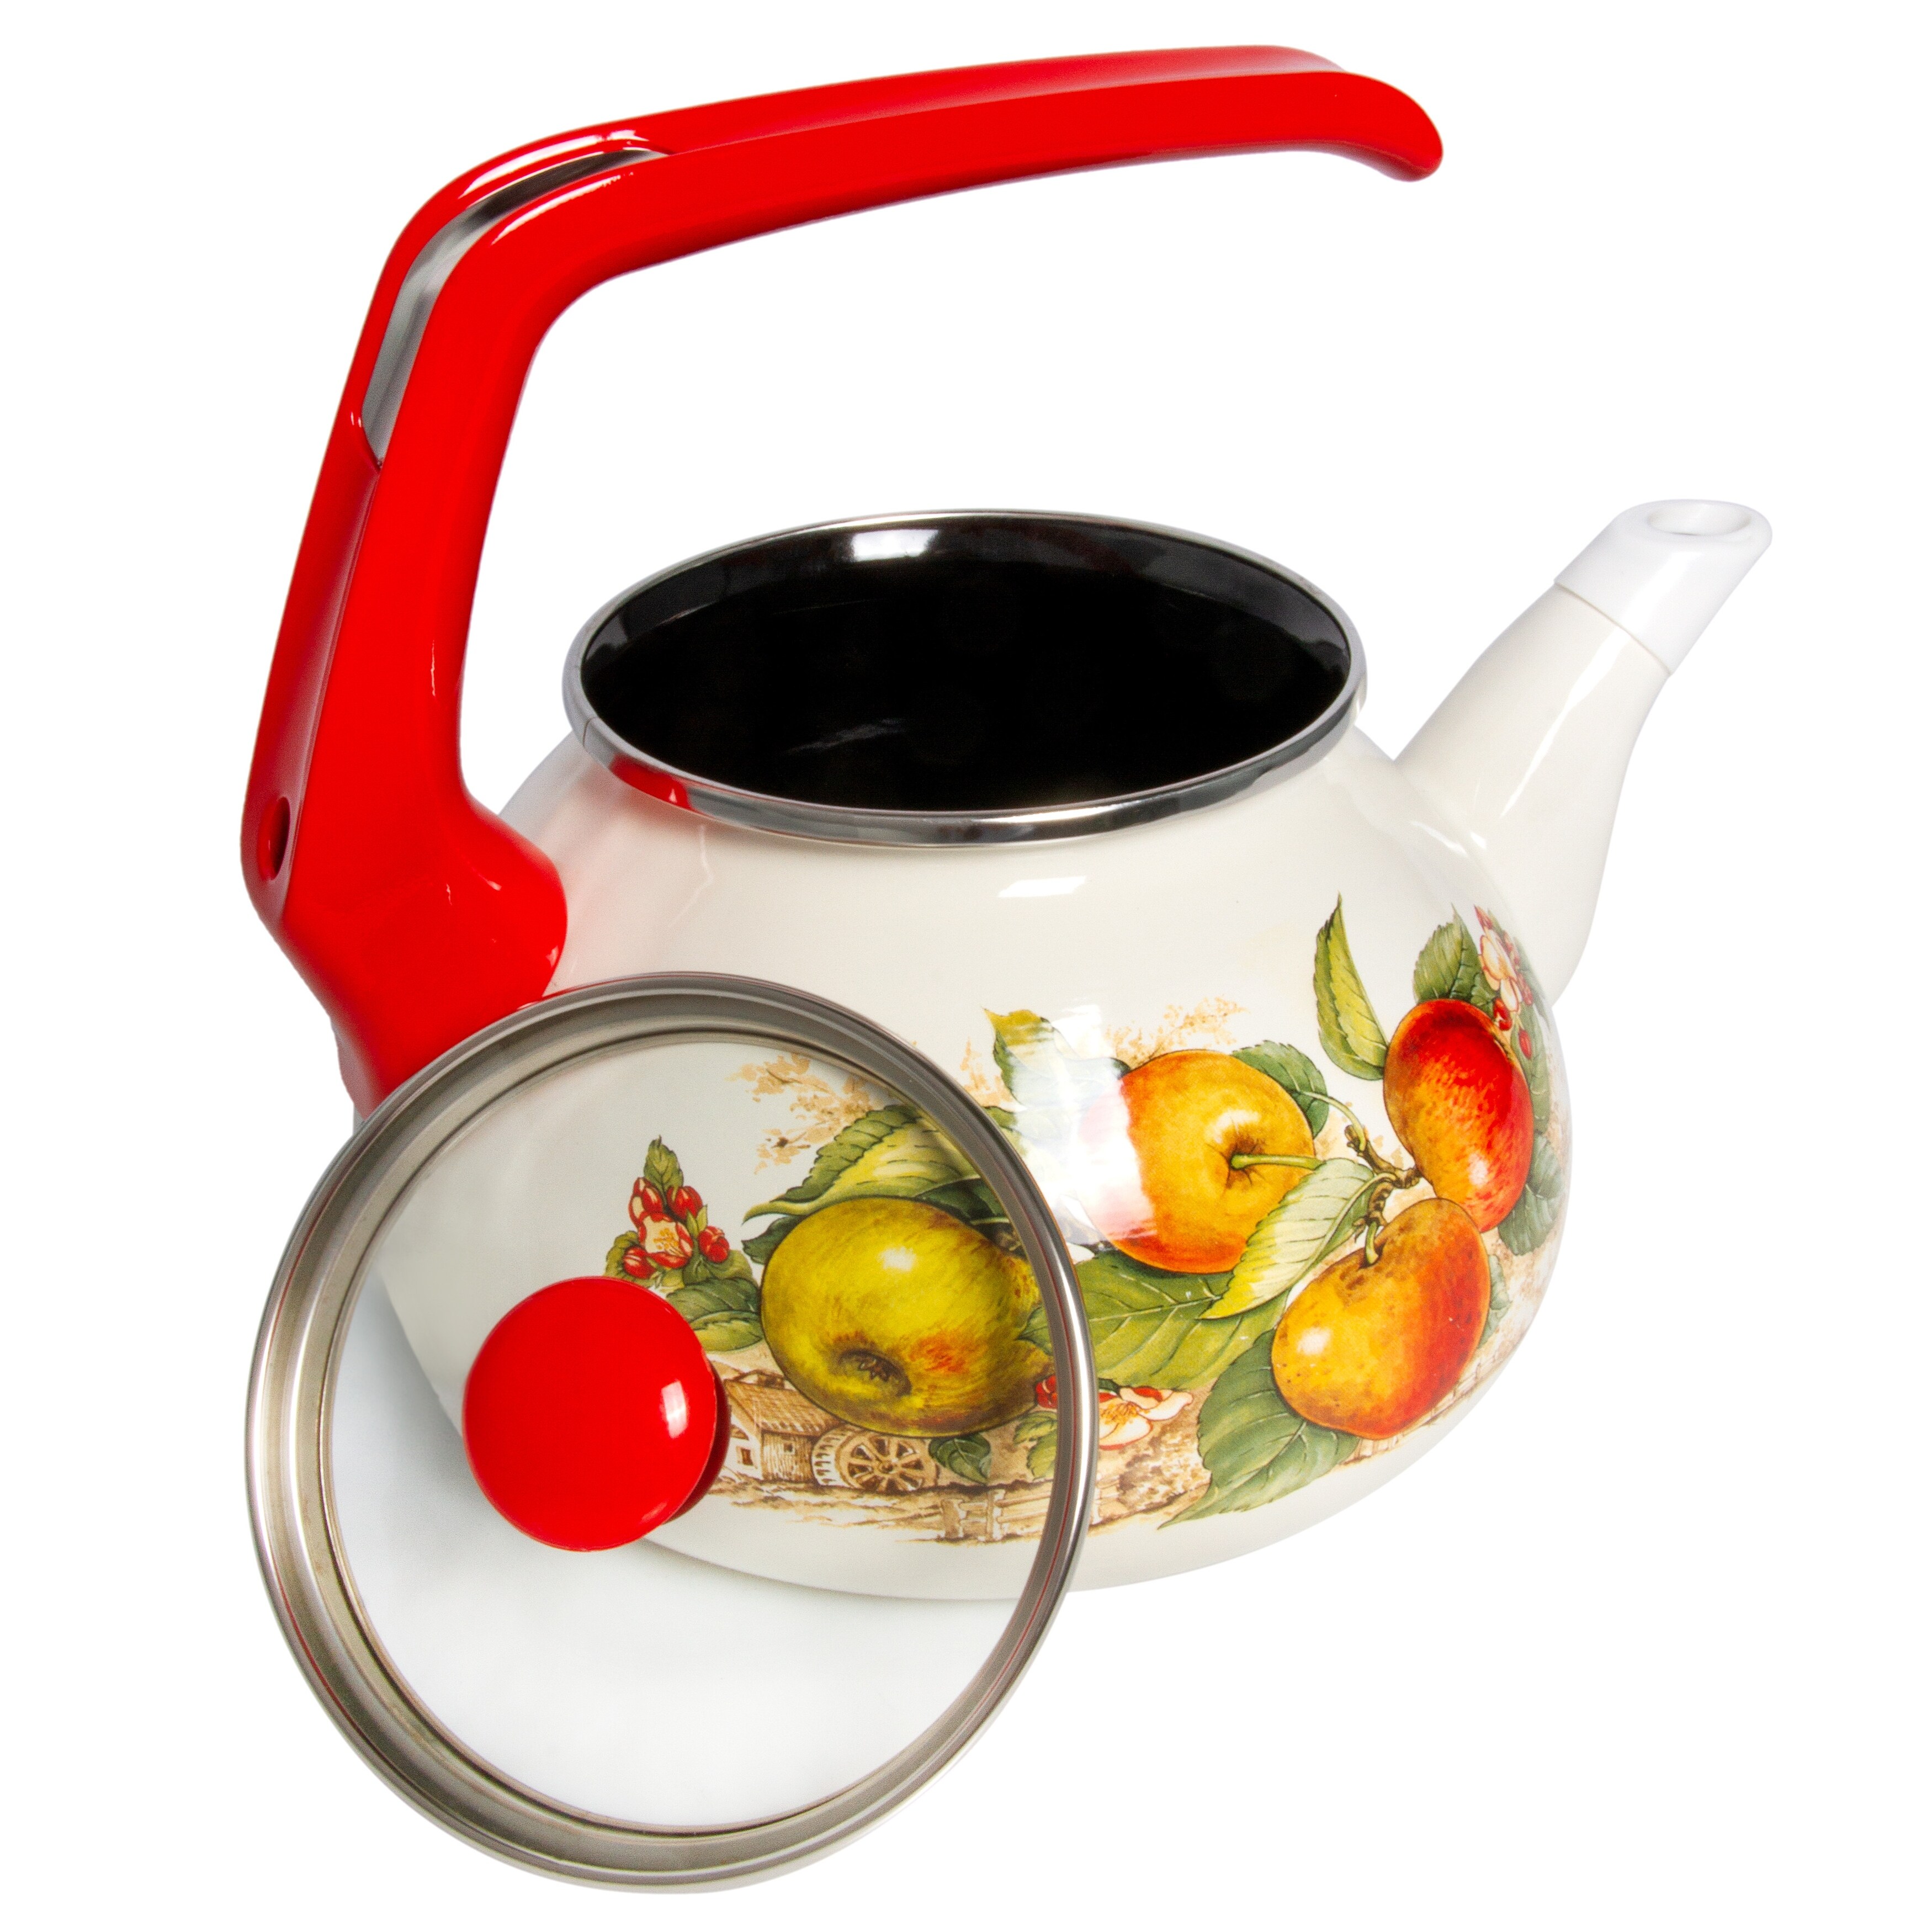 https://ak1.ostkcdn.com/images/products/is/images/direct/0af0bc7bb35974b85db3b3979d7323bf42cb502d/STP-Goods-2.3Qt-Apples-Enamel-Kettle.jpg